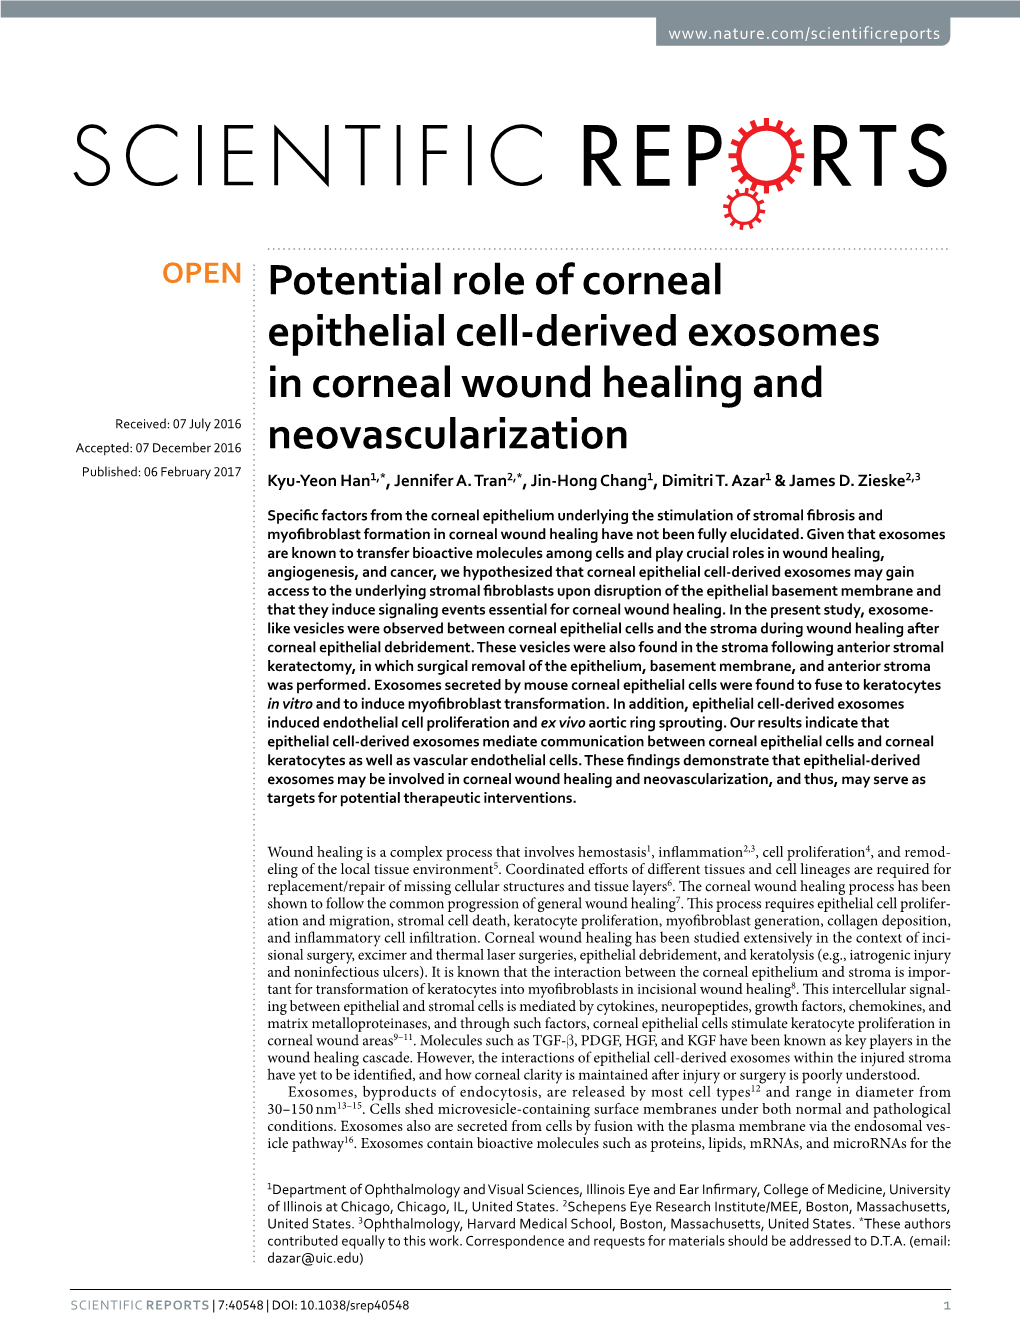 Potential Role of Corneal Epithelial Cell-Derived Exosomes In